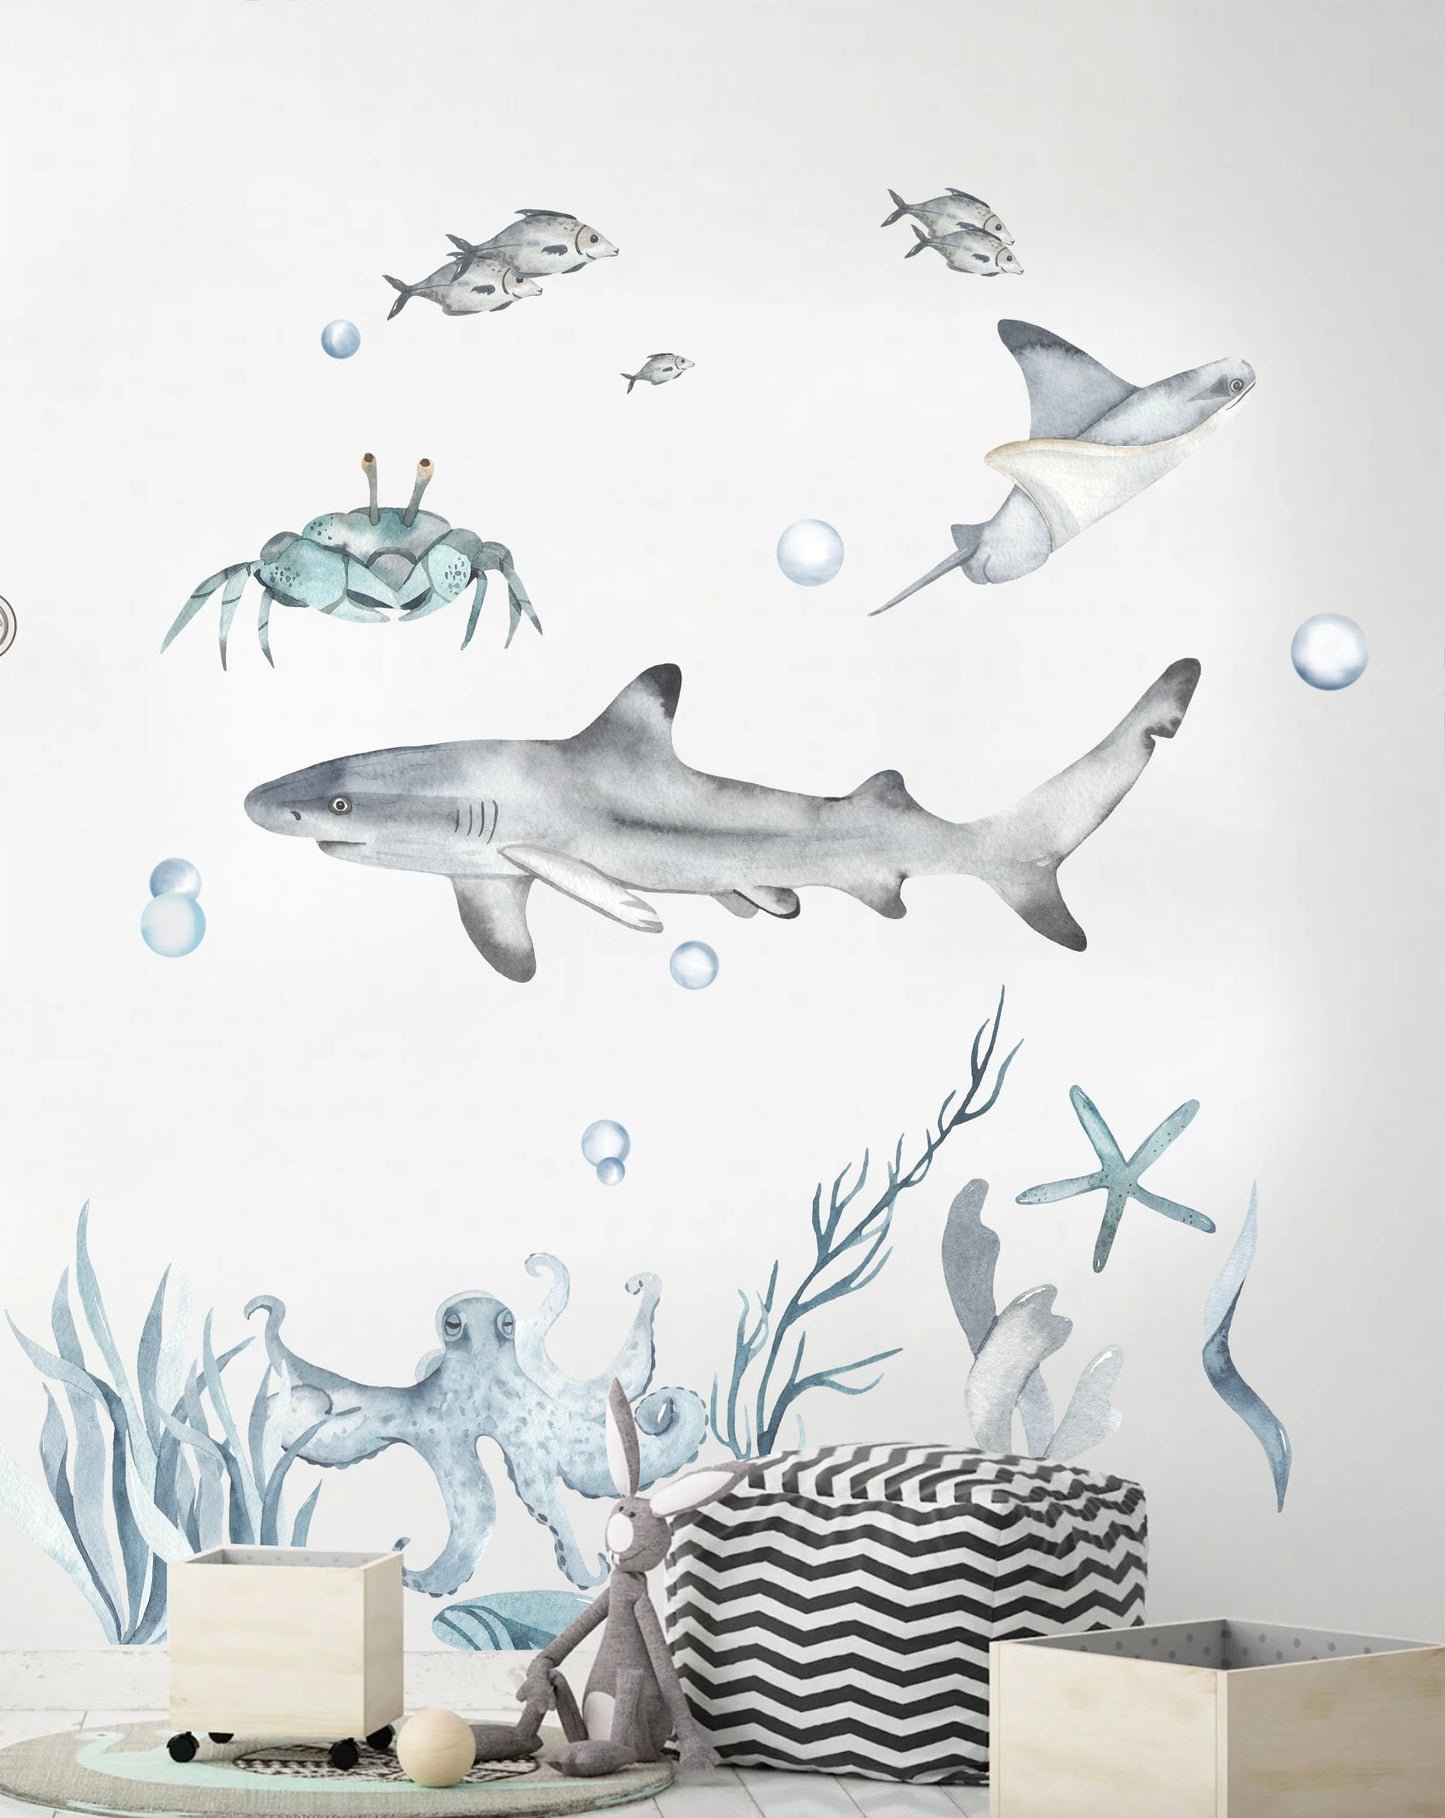 Blue Grey Underwater World Wall Decal - Shark Crab Octopus Jelly Fish - BR033